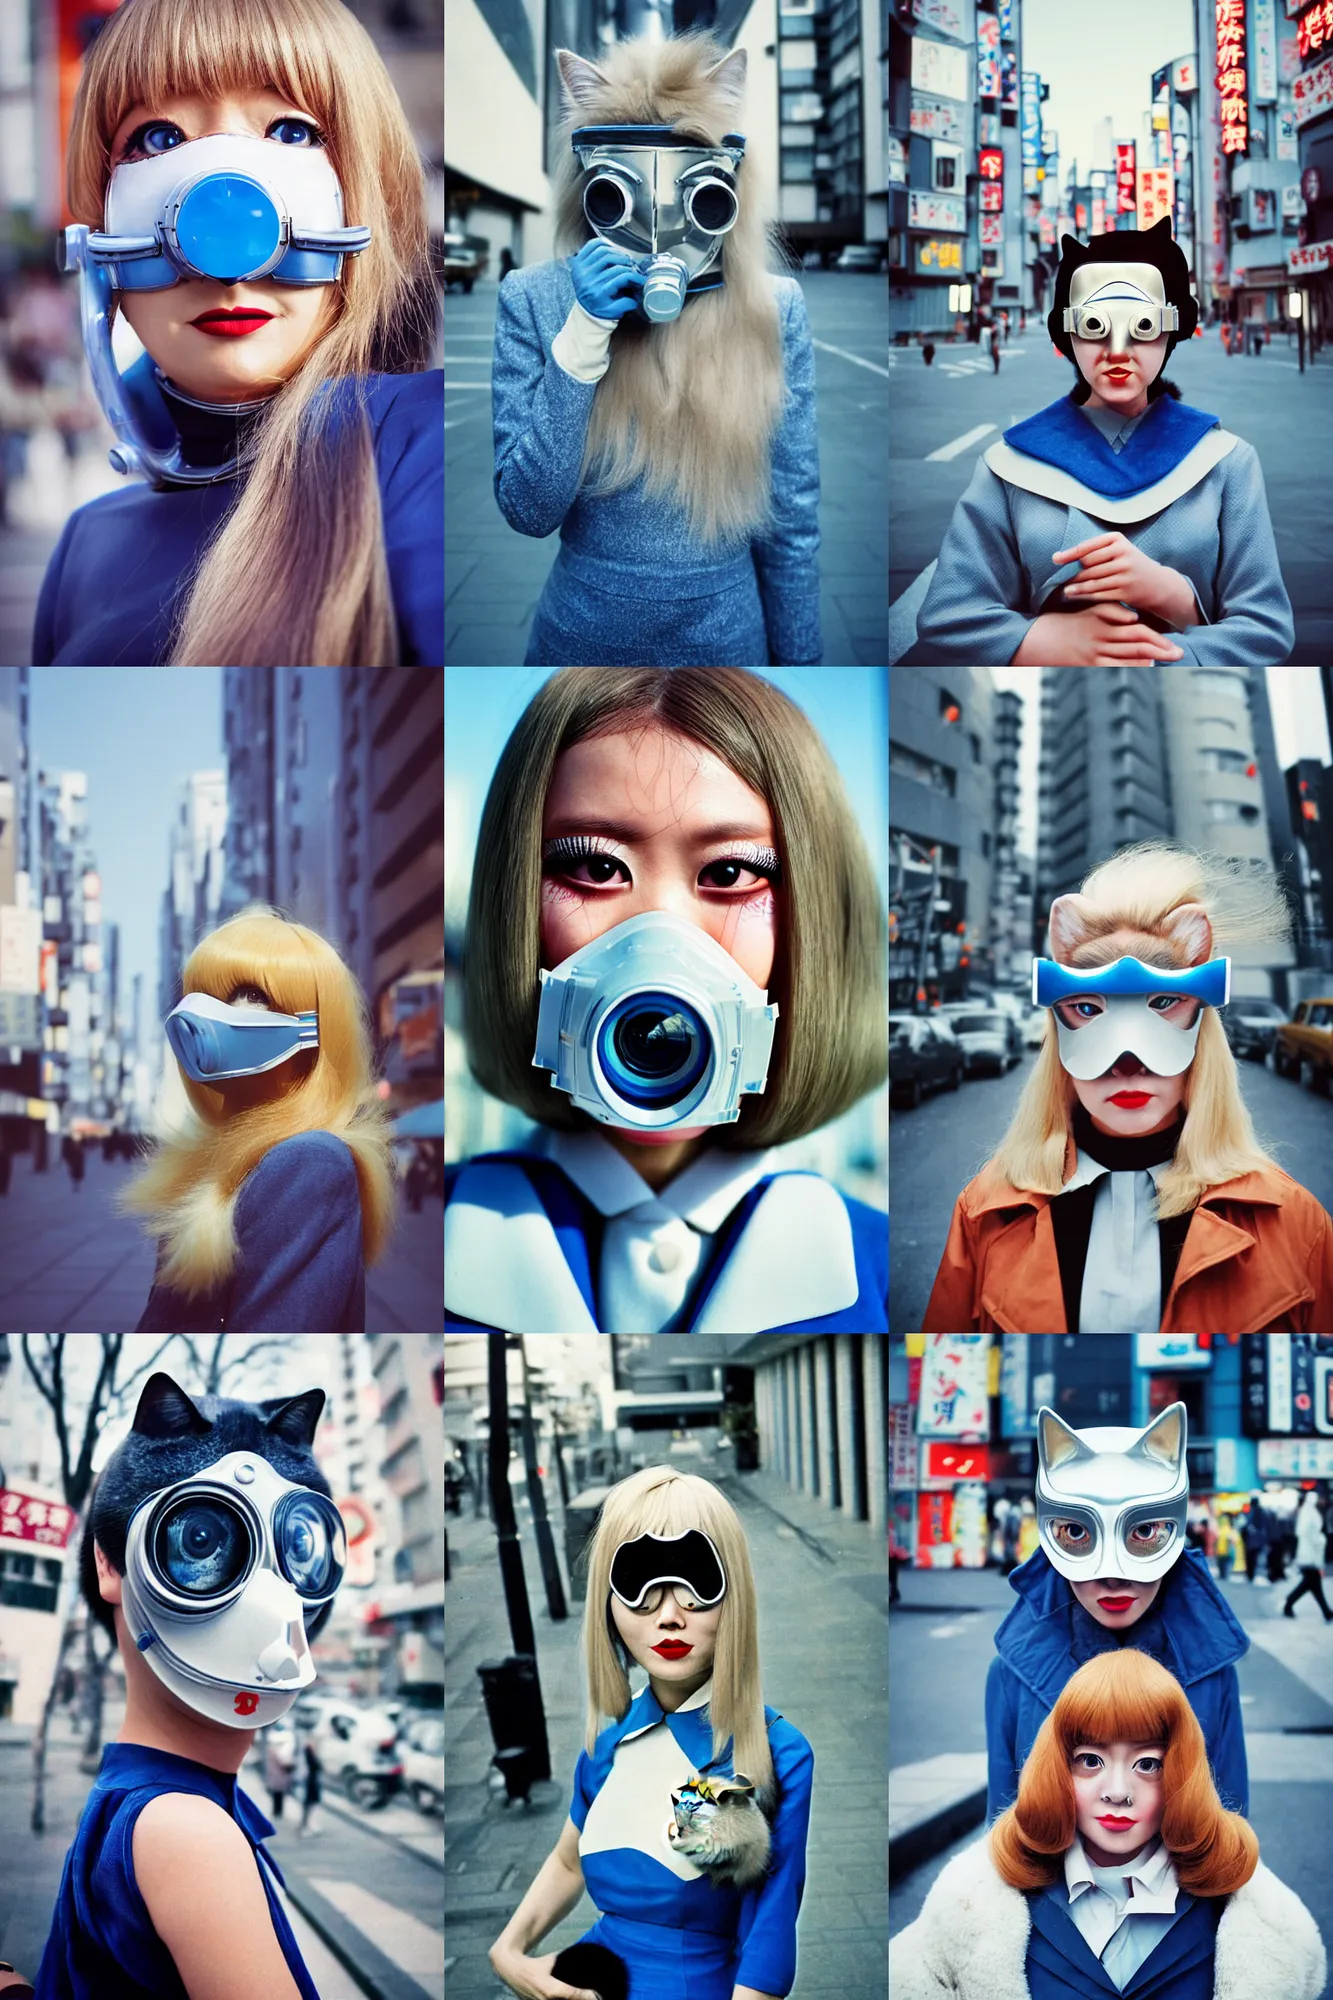 Prompt: !Cinestill 50d!,!8K!,highly detailed: beautiful three point perspective extreme closeup portrait photo in style of 1960s frontiers in cosplay retrofuturism tokyo seinen manga street photography fashion edition, tilt shift zaha hadid style tokyo background, highly detailed, focus on cat mask respirator;blonde hair;blue eyes, clear eyes, soft lighting